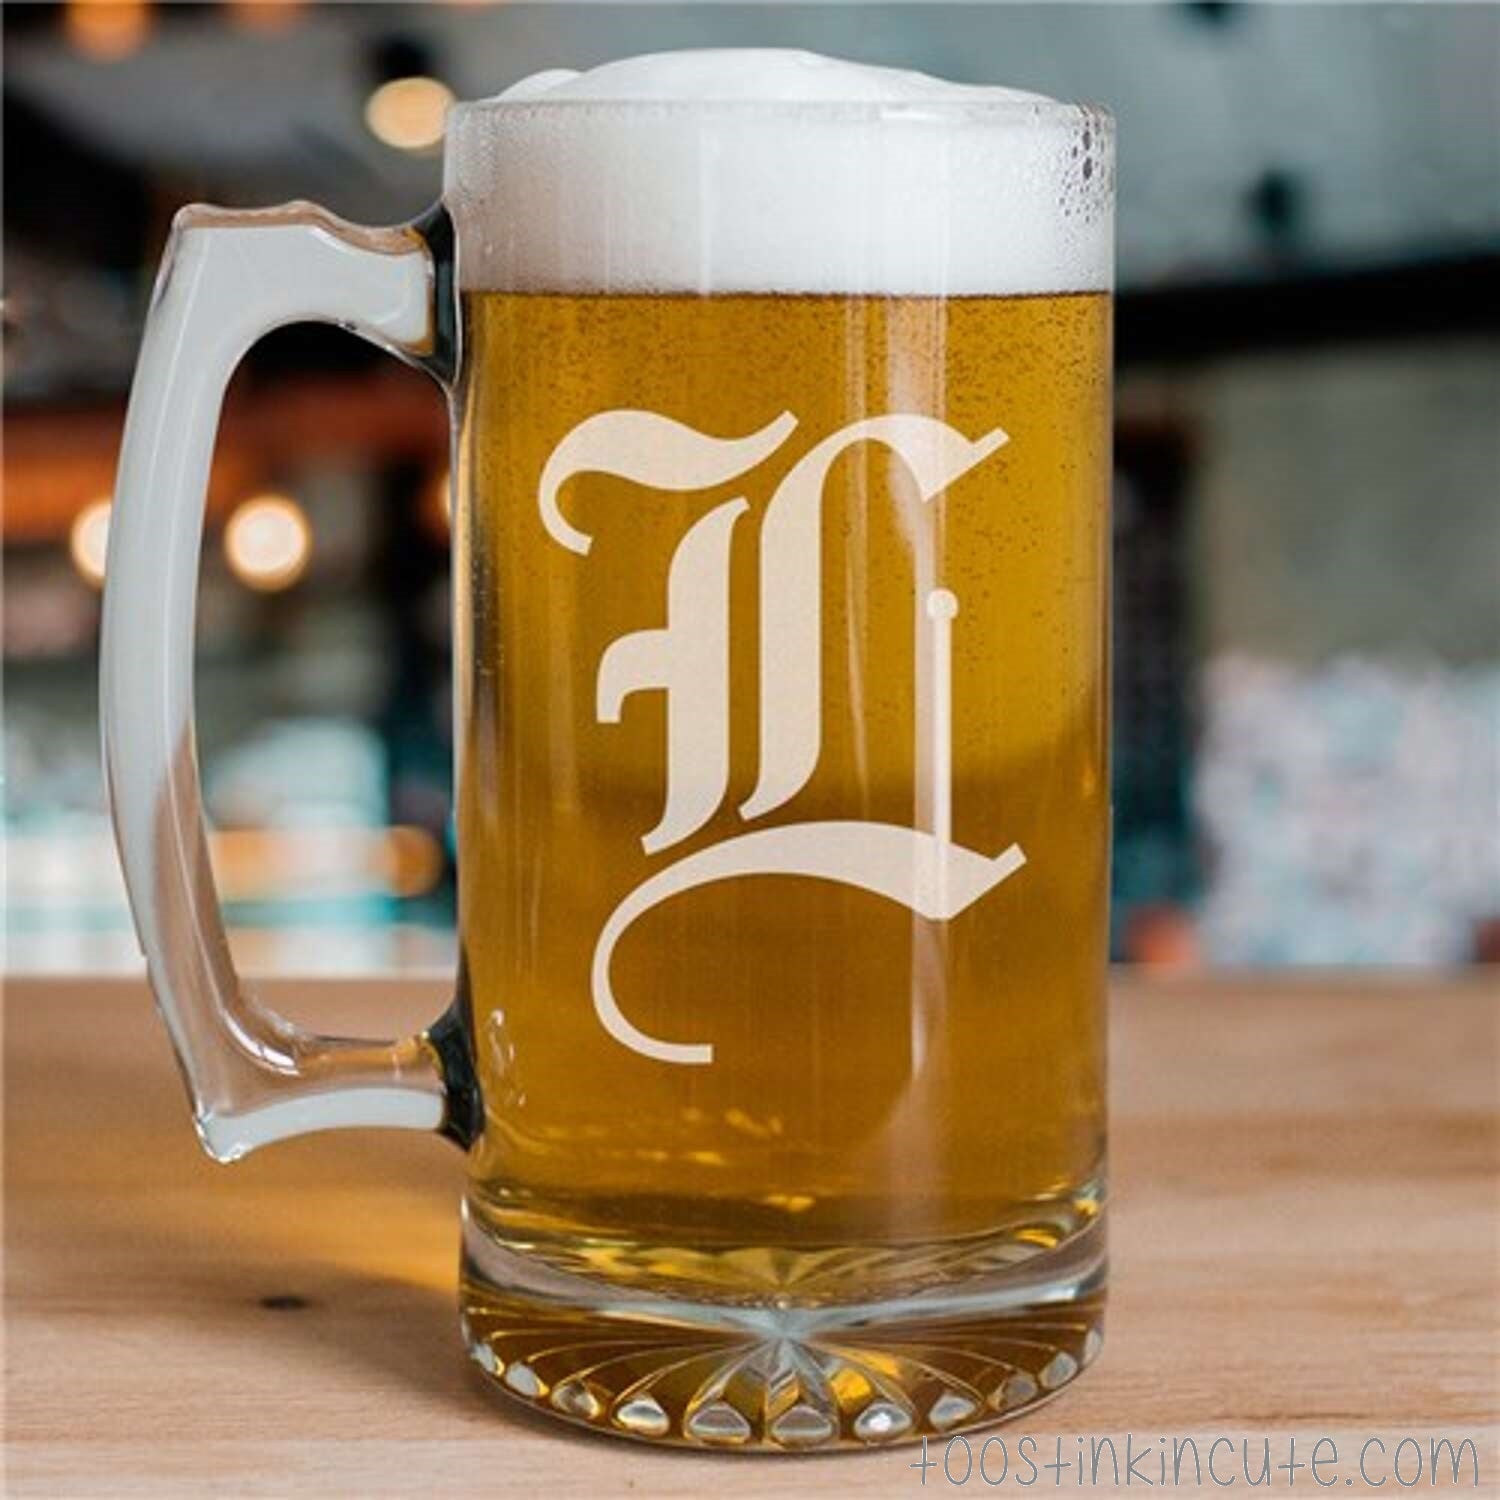 Initial Personalized Glass Beer Mug Stein